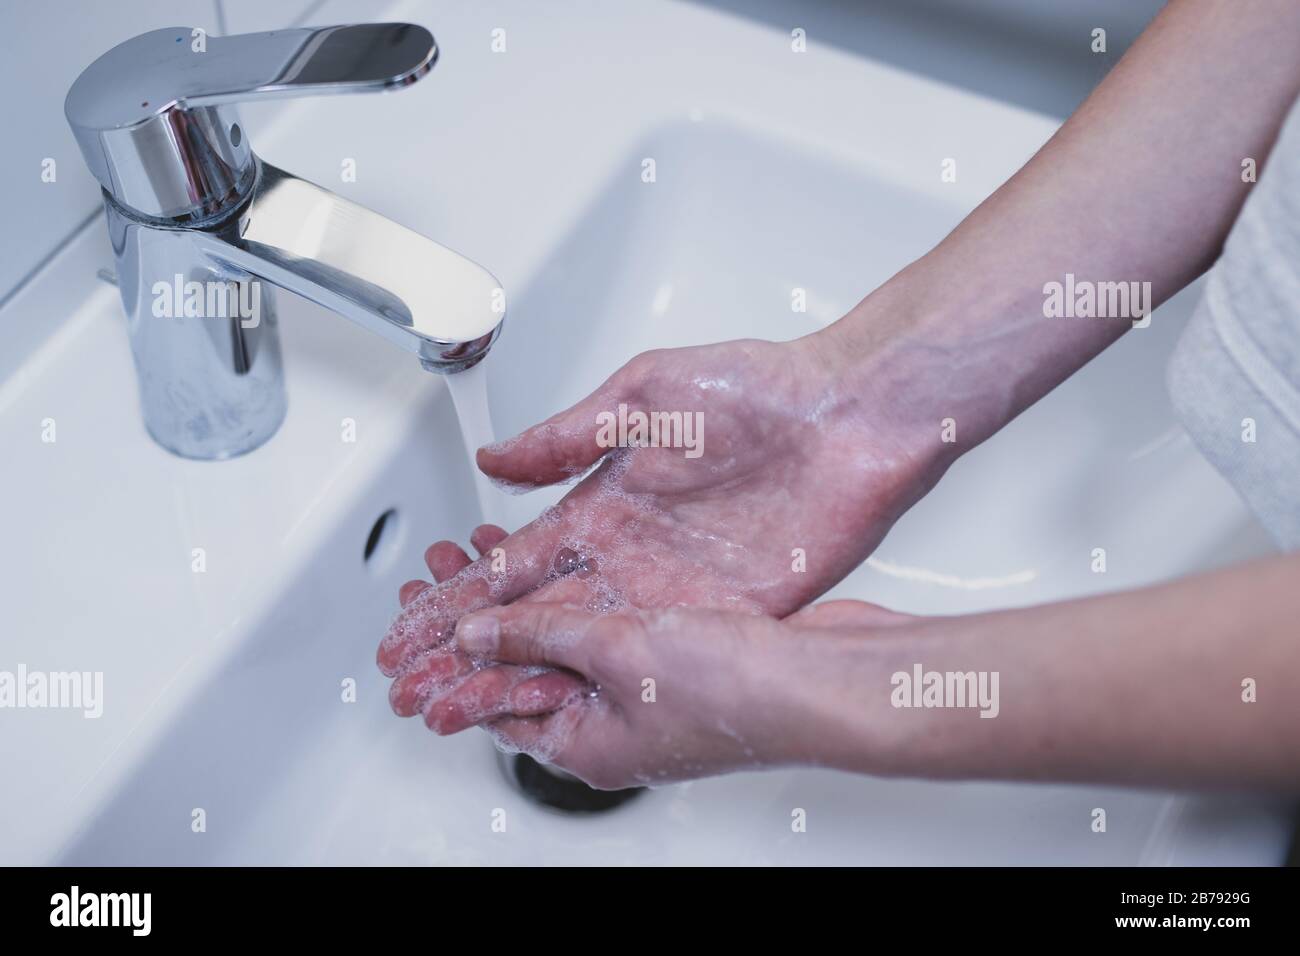 Woman washing her hands with soap in the sink. Royalty free stock photo. Stock Photo